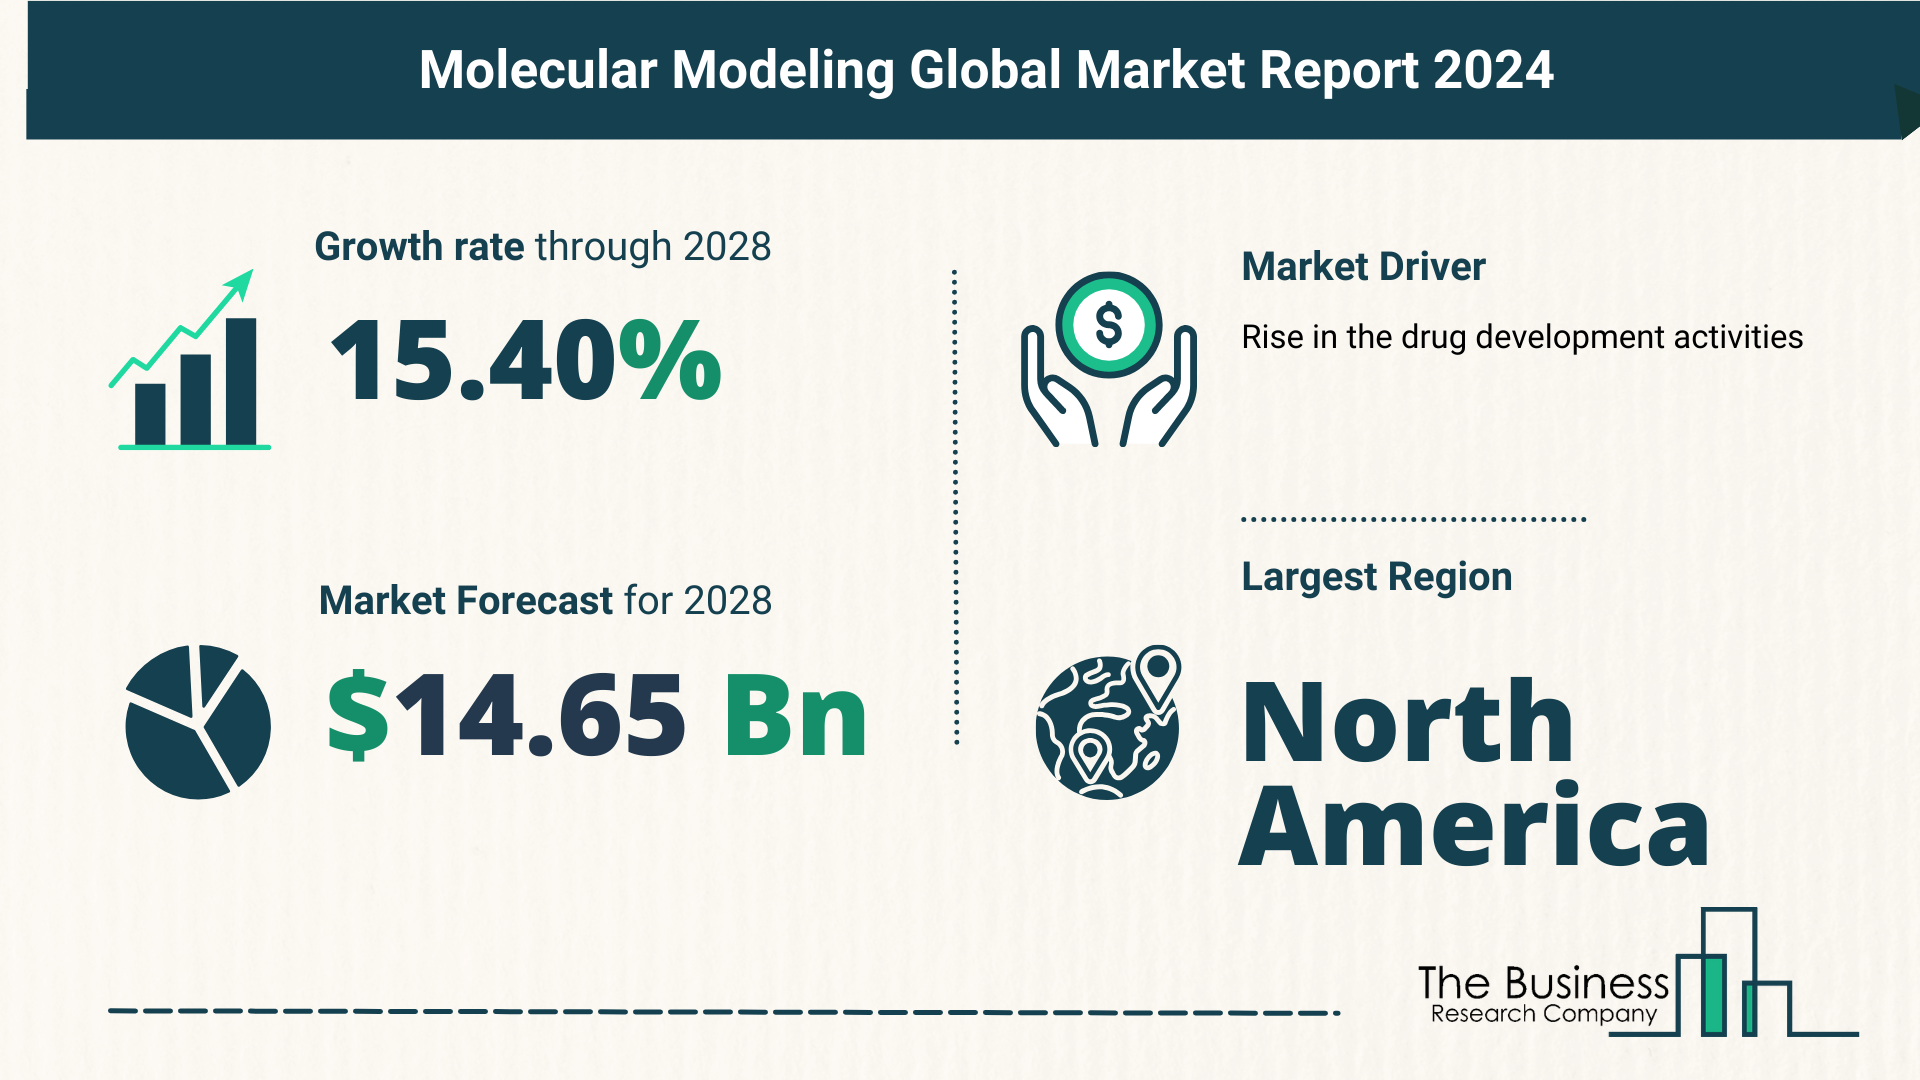 How Is The Molecular Modeling Market Expected To Grow Through 2024-2033